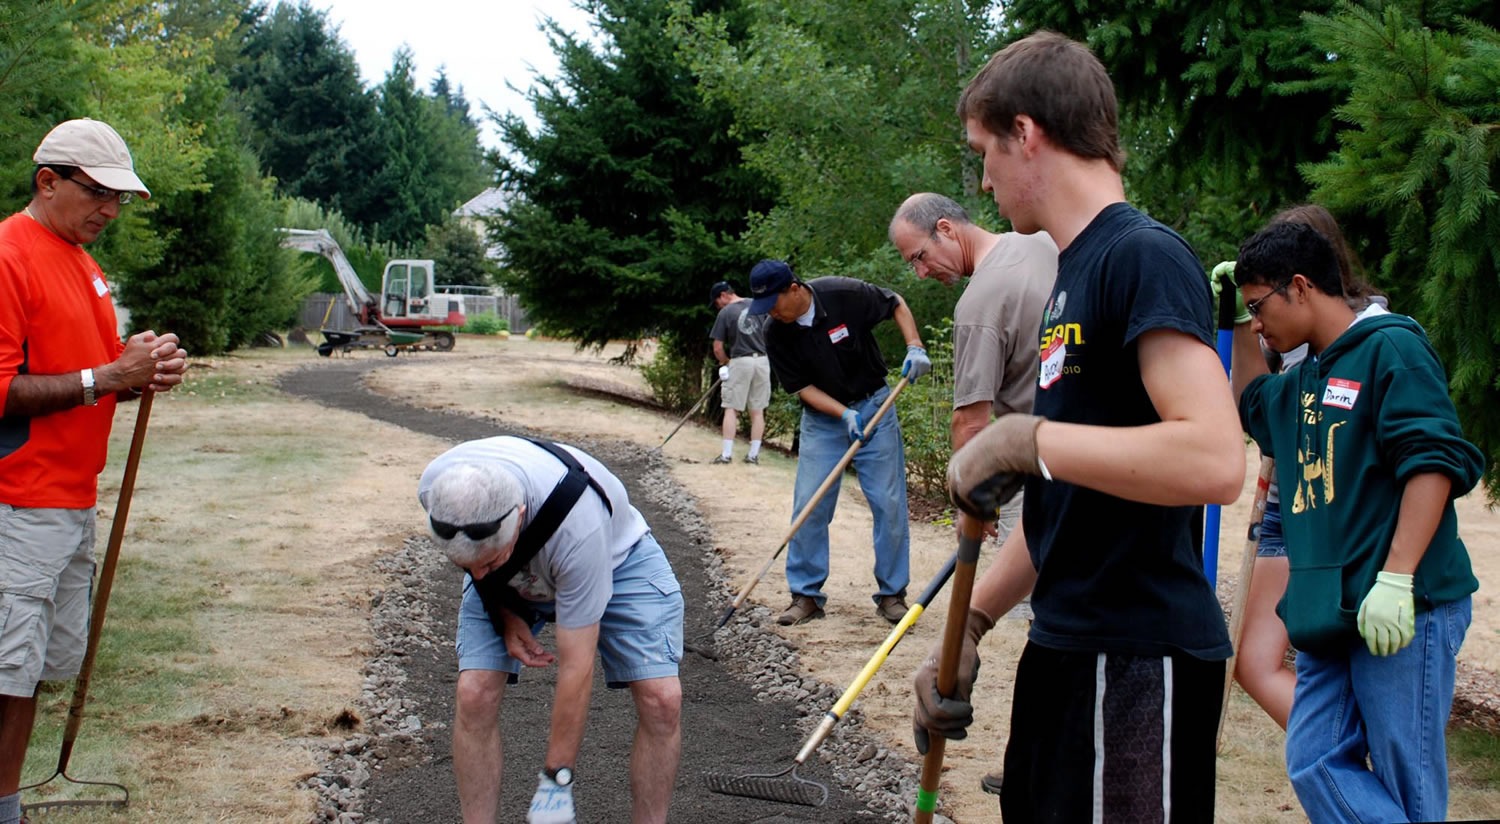 Volunteers from the First Place neighborhood and seven students from Evergreen High School recently built a new 900-foot soft path for First Place Park.